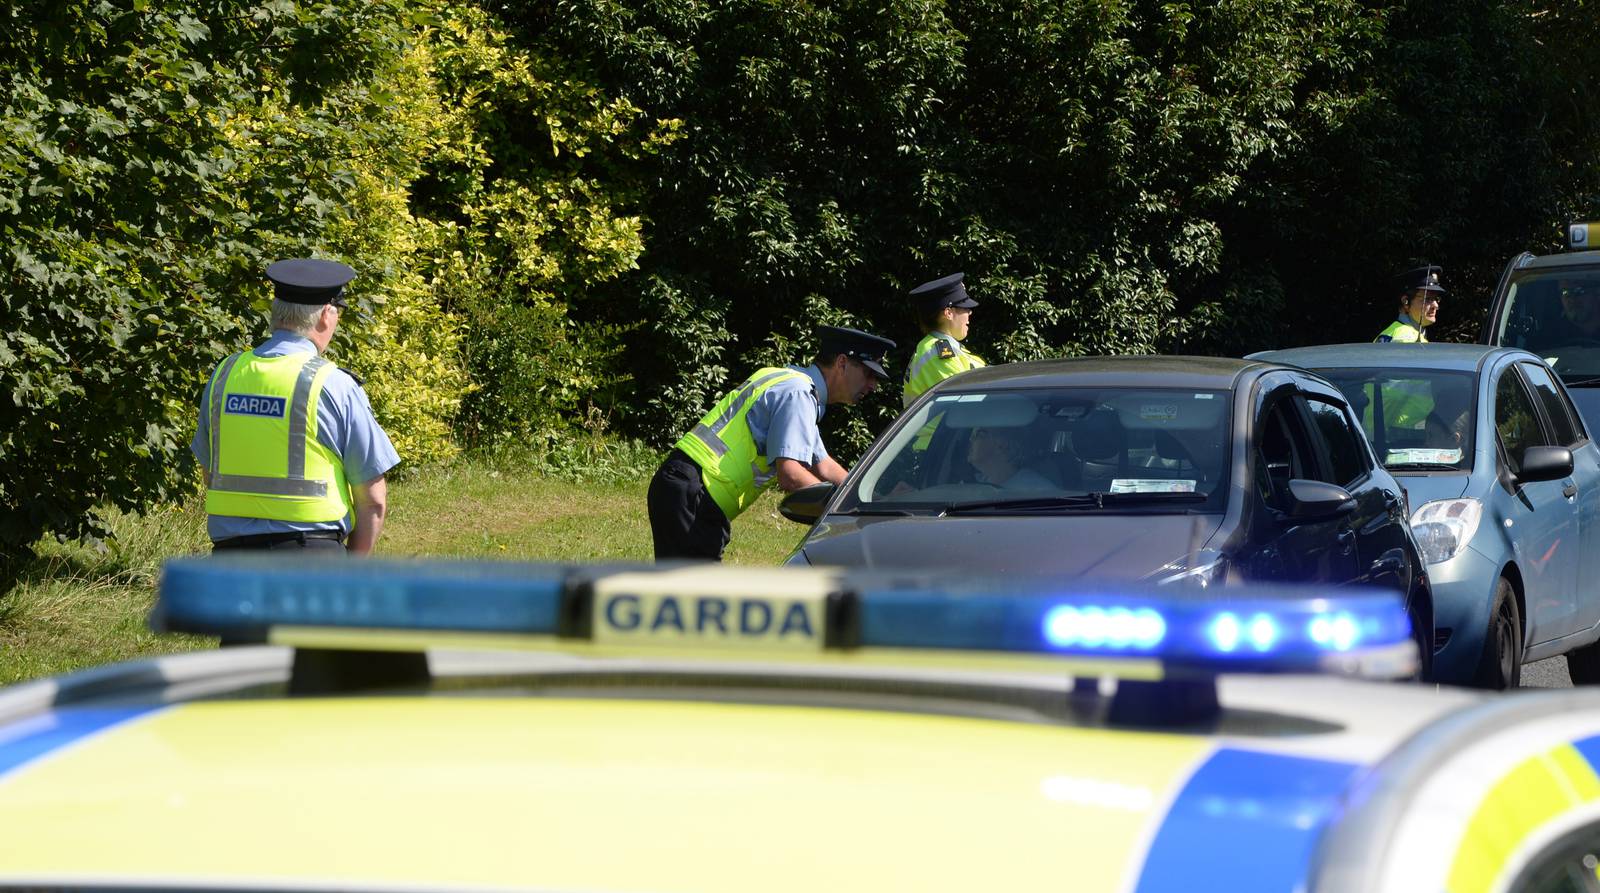 26/08/2019 - NEWS - FILE -

Gardai pictured at a checkpoint as the Road Safety Authority and An Garda Siochana, launch a campaign aimed at getting people off long term reliance on a learner permit. 
Photograph: Dara Mac Dónaill / The Irish Times




Gardai pictured at a checkpoint as the Road Safety Authority and An Garda Siochana, launch a campaign aimed at getting people off long term reliance on a learner permit. 



Photograph: Dara Mac Donaill / The Irish Times